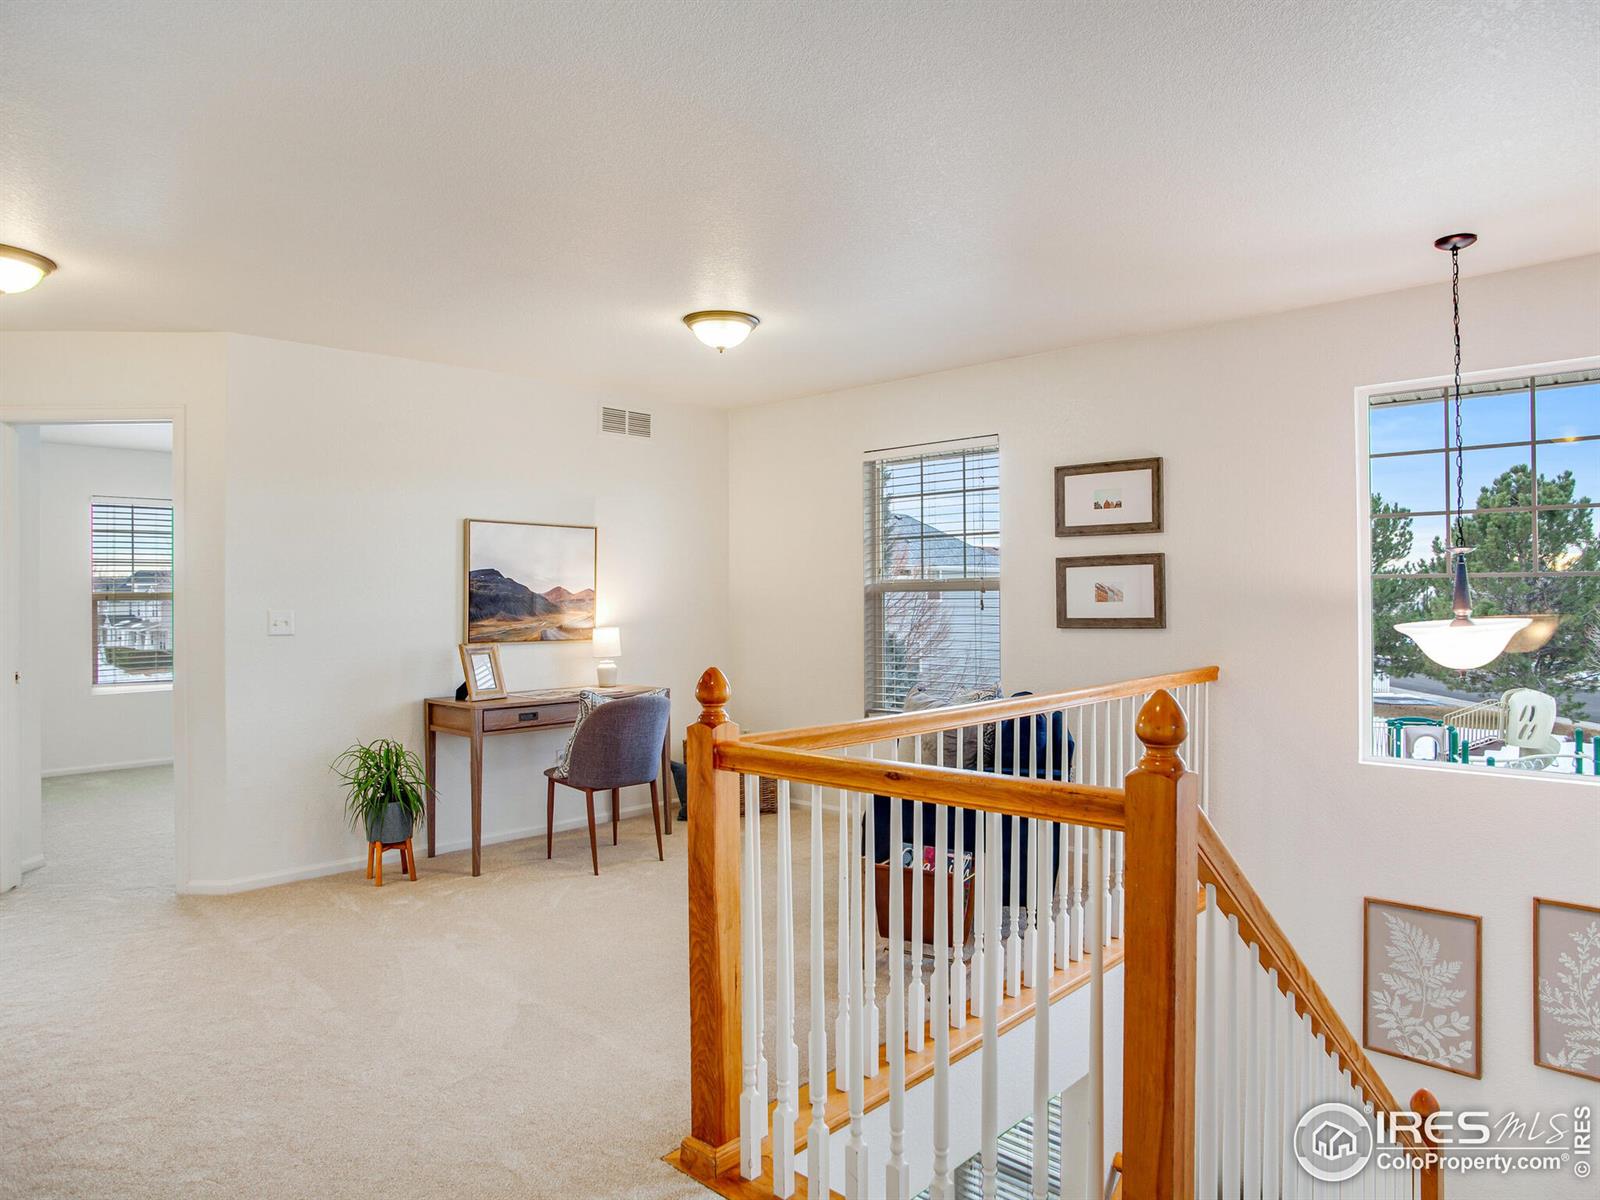 7377 Russell, Frederick, CO